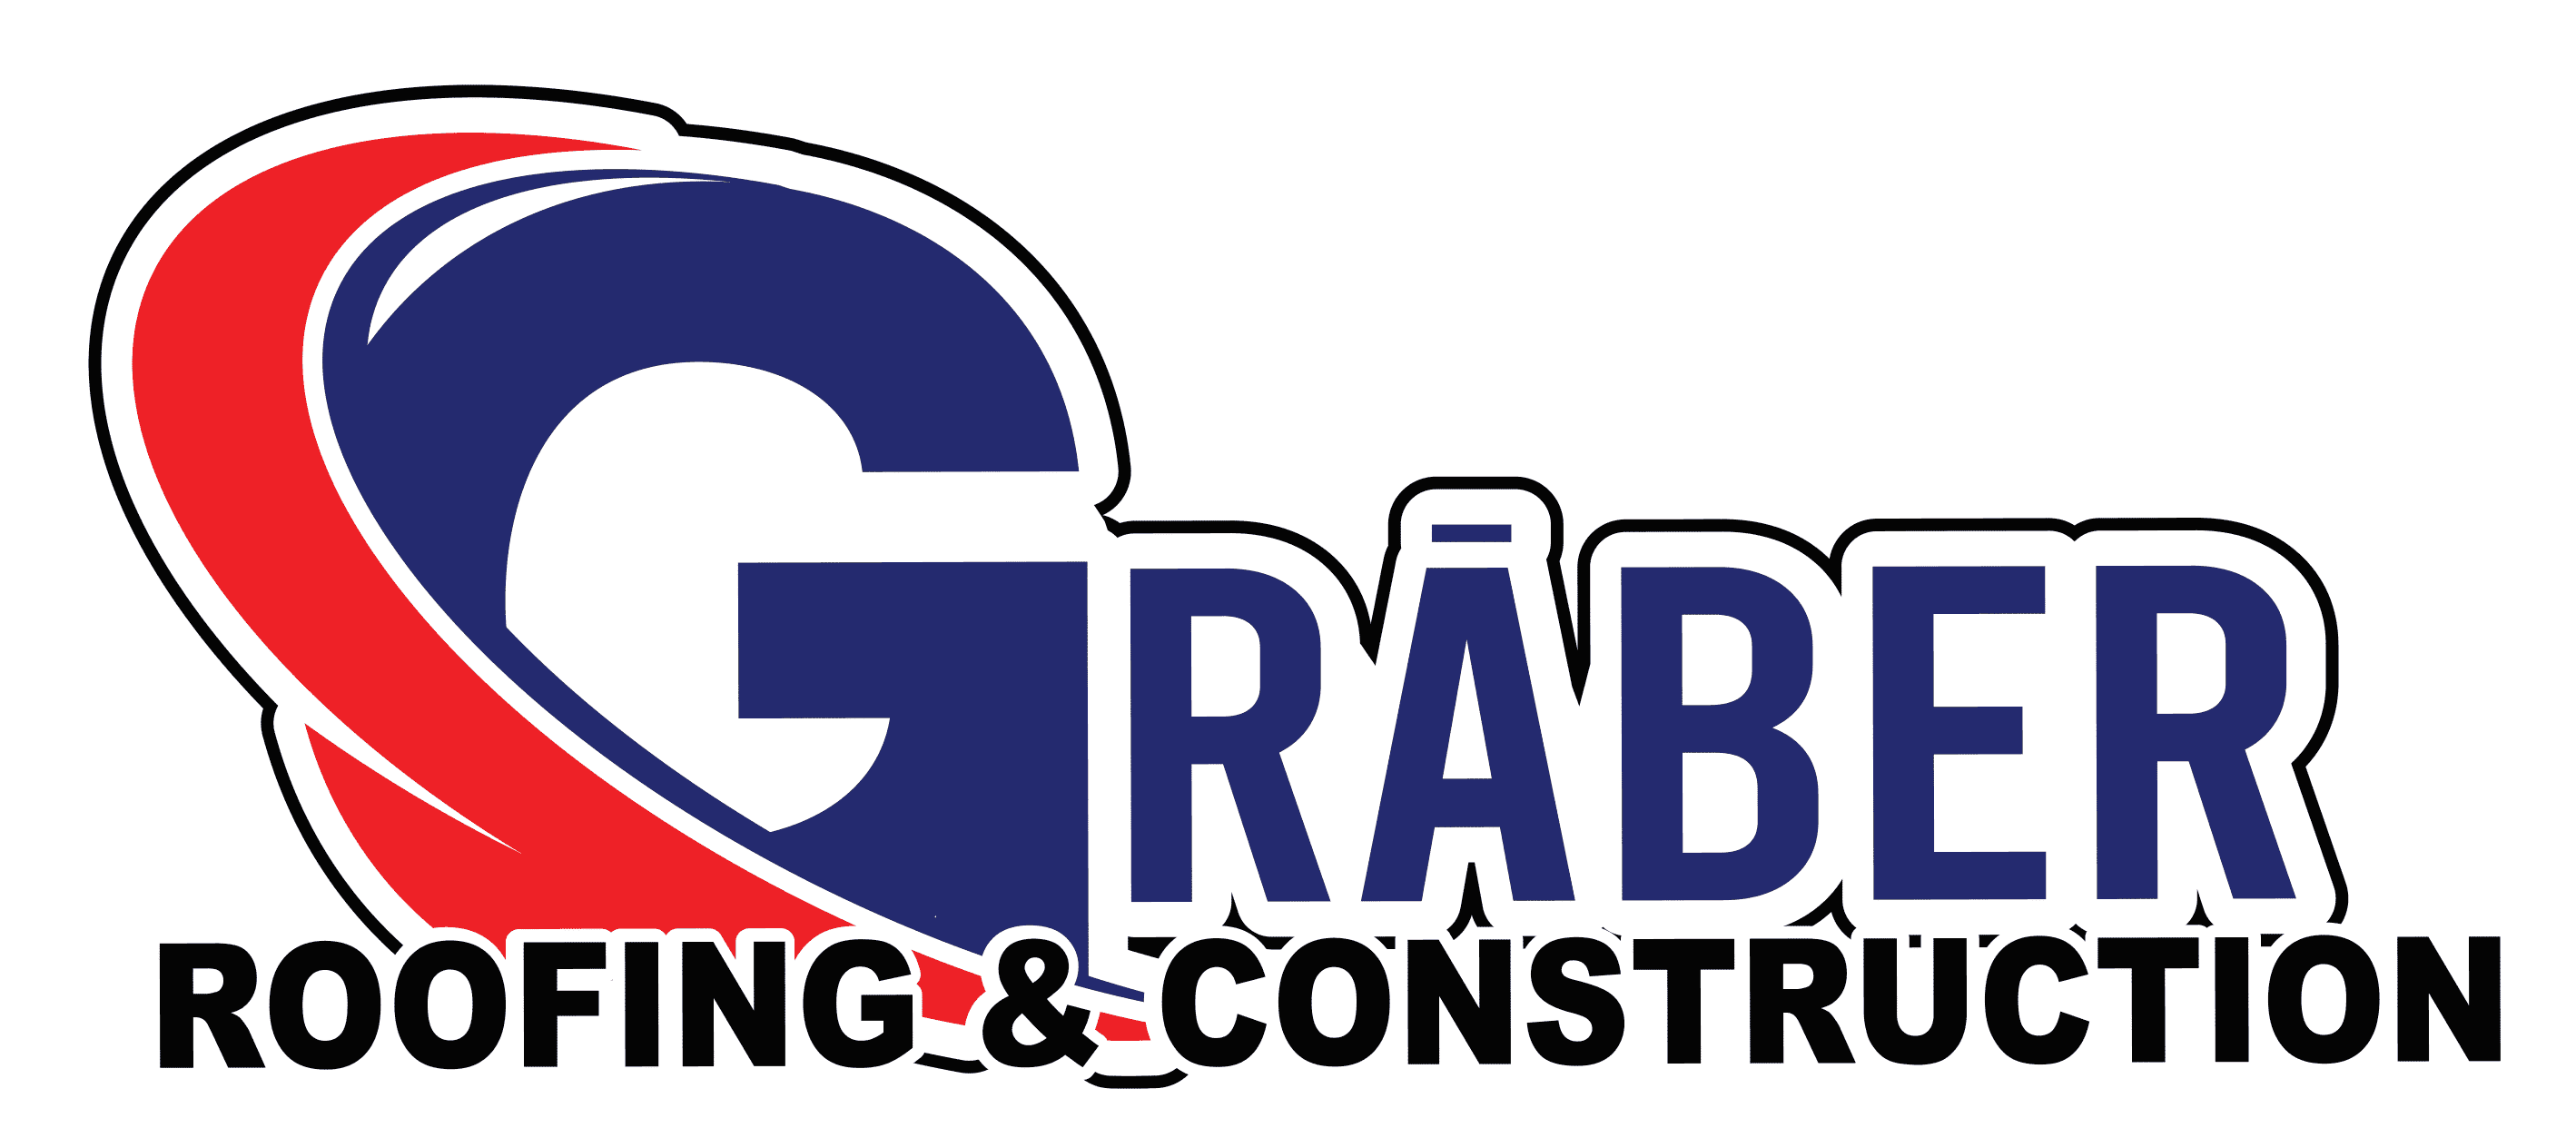 Graber Roofing & Construction Inc